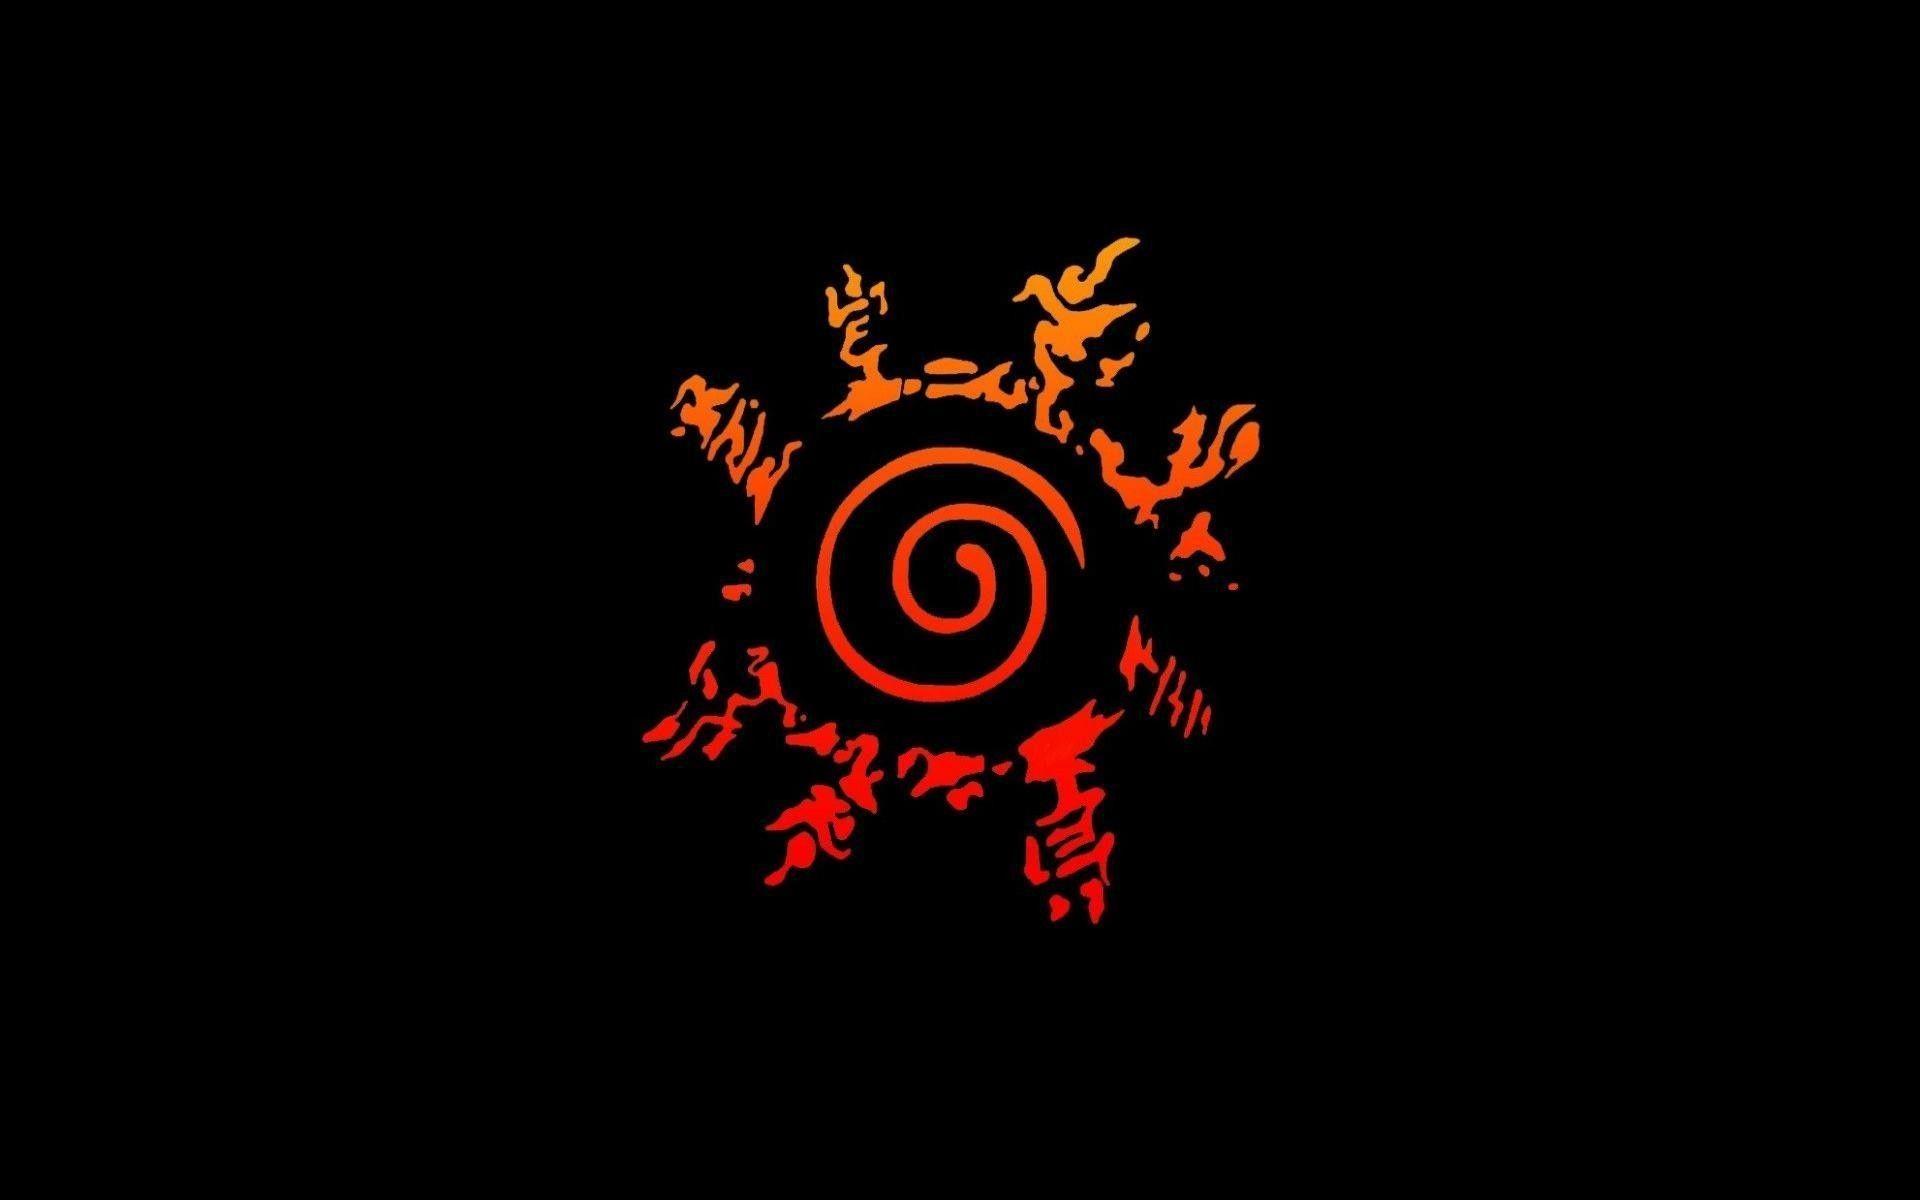 Naruto Clans Wallpapers